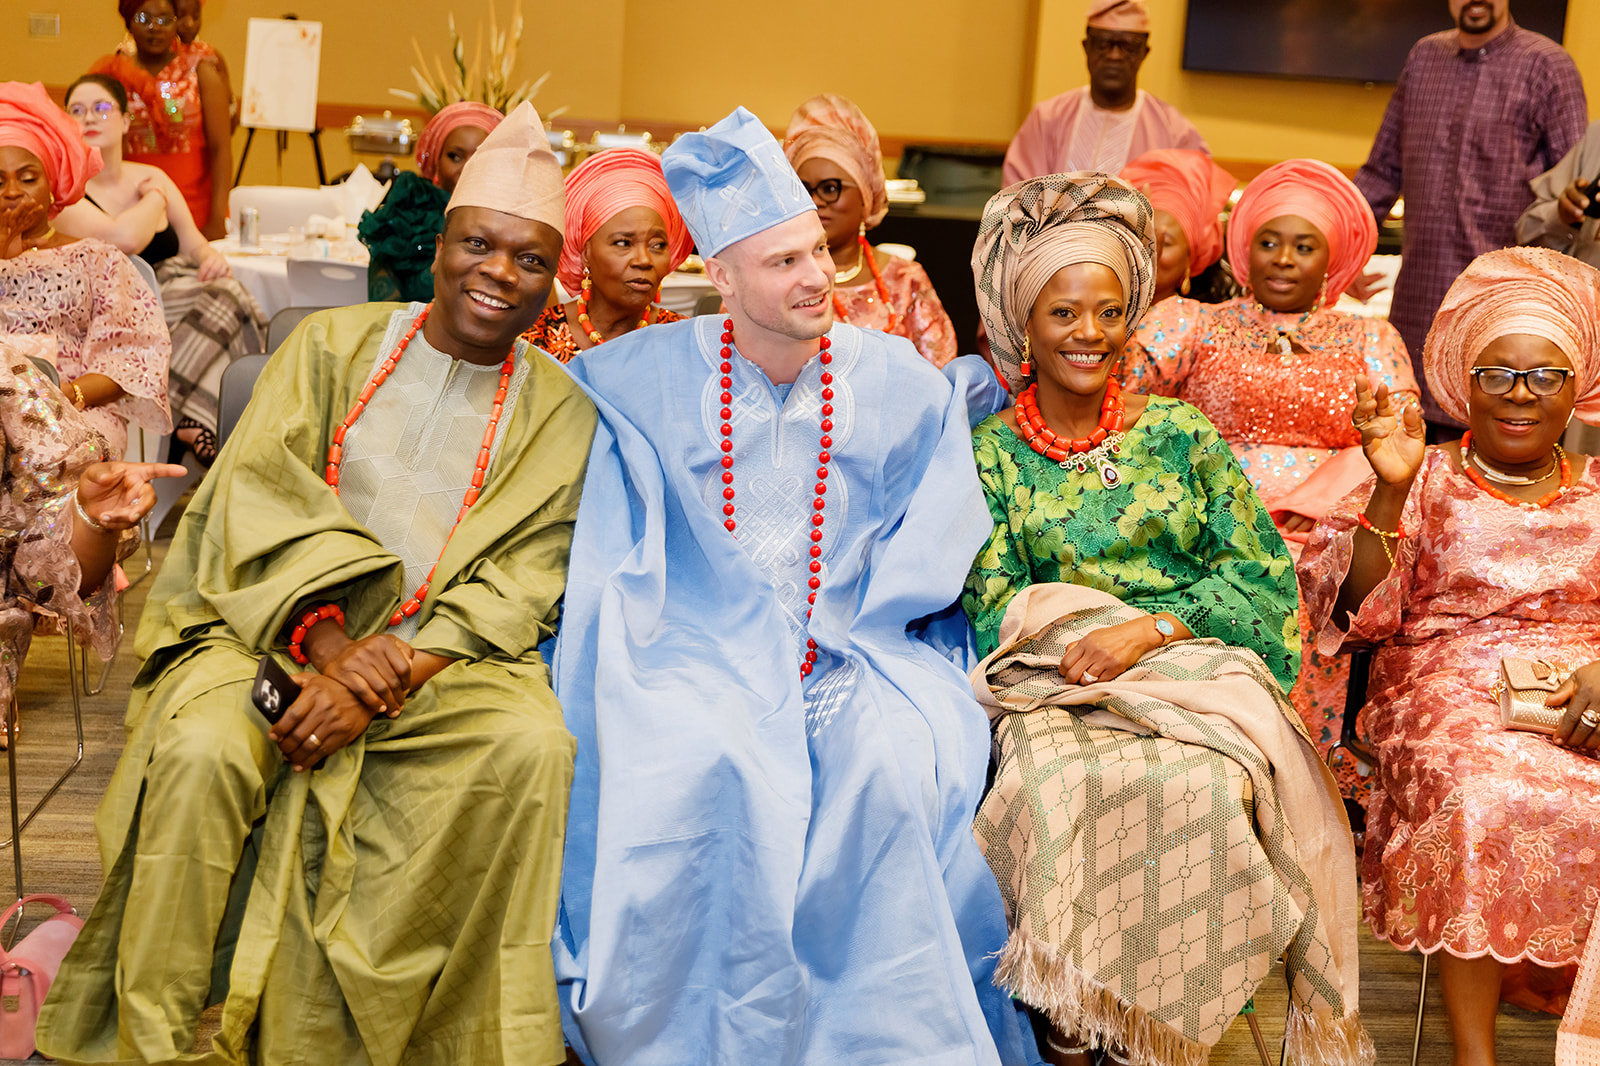 Groom with his family-in-law during Nigerian and American traditional wedding at Truhlsen Campus Events Center at UNMC